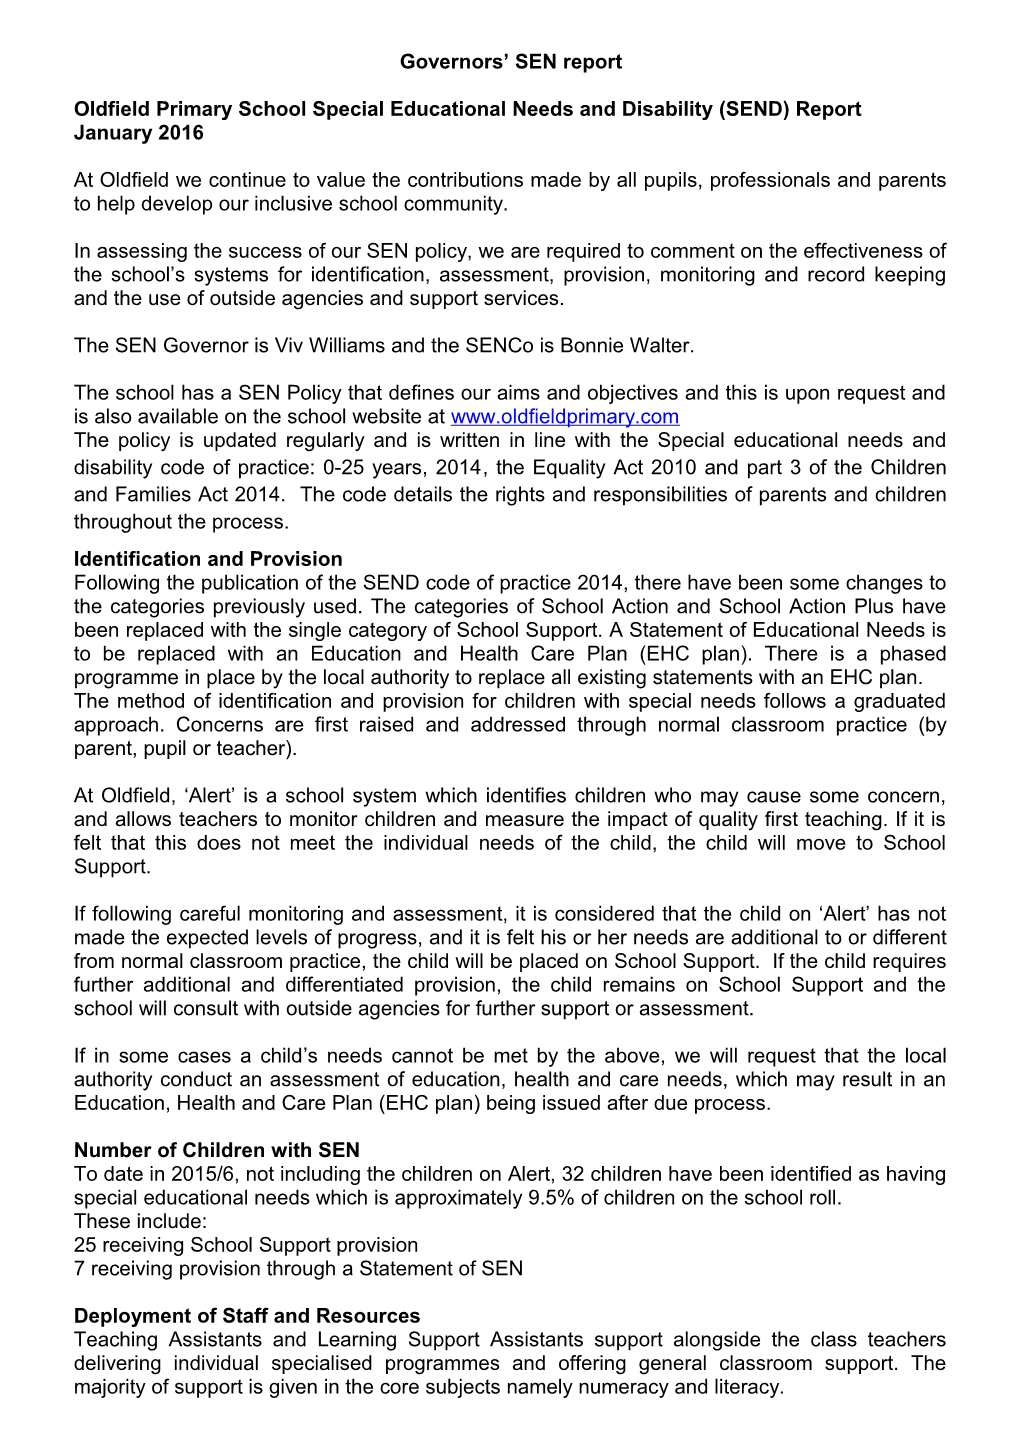 Oldfield Primary School Special Educational Needs and Disability (SEND) Report